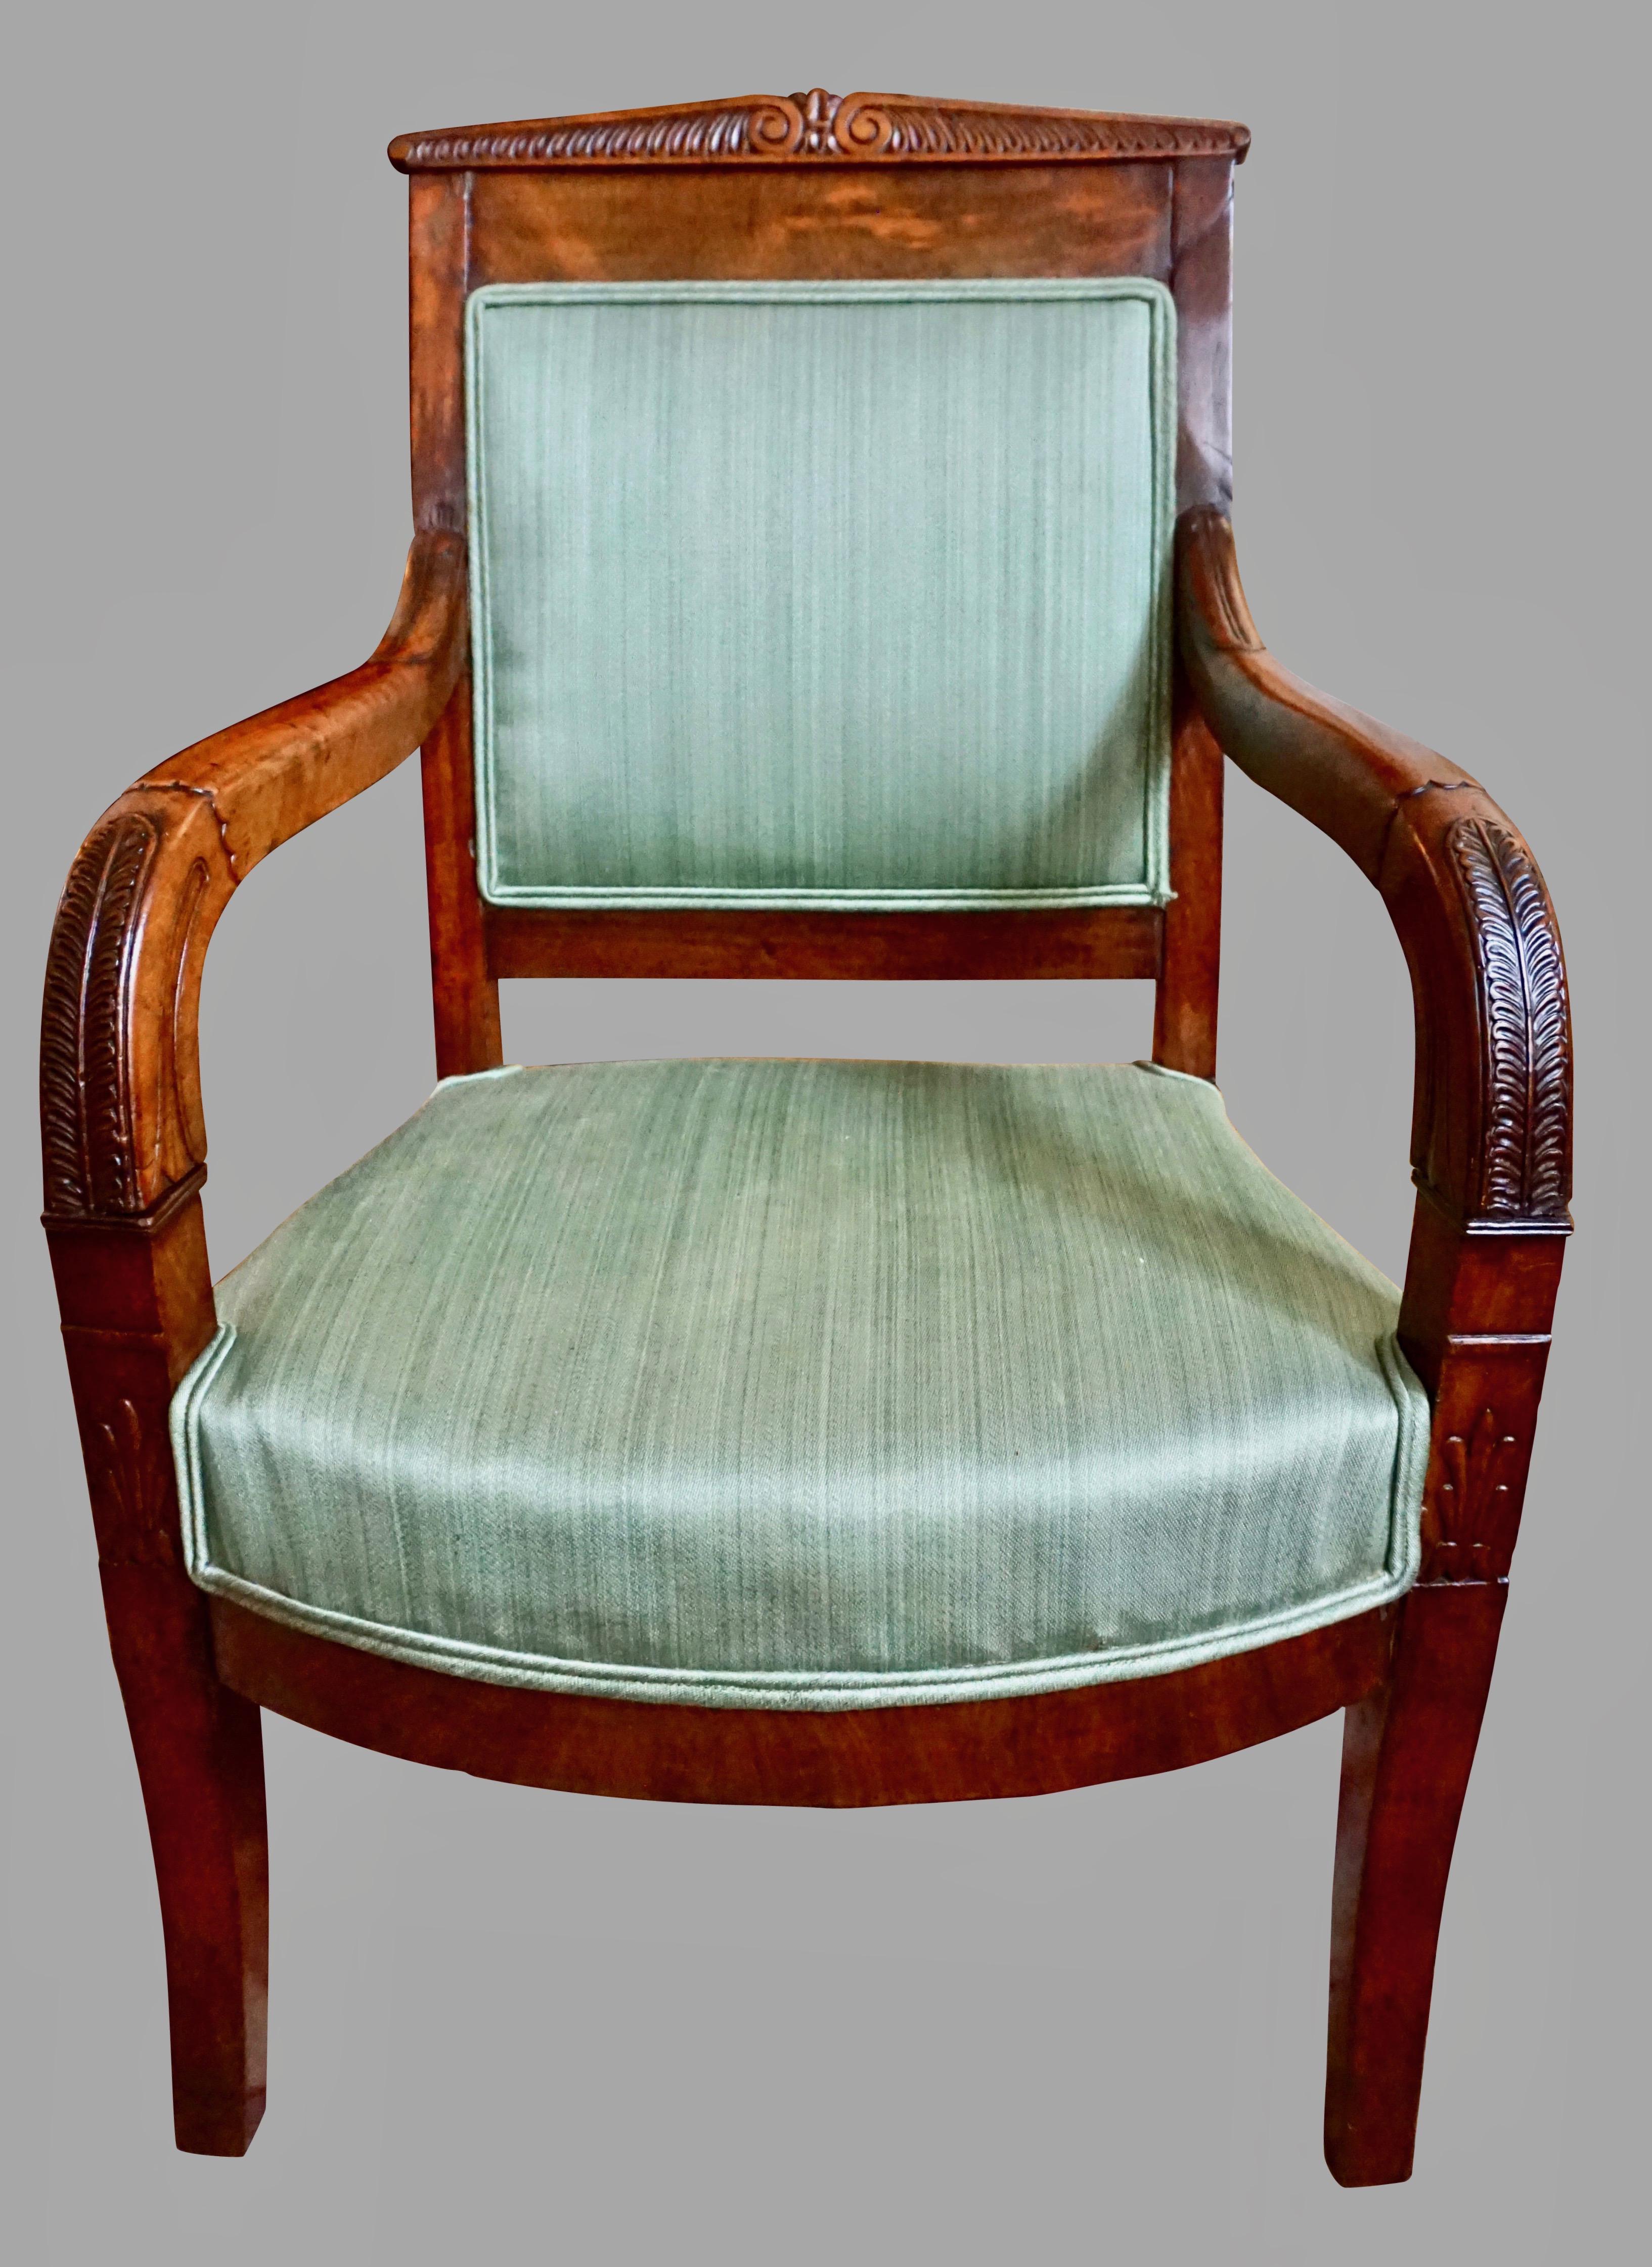 A rare and charming French Charles X period mahogany child's armchair, the carved triangular crest rail above downswept arms with acanthus leaf details, all resting on curved legs. Now upholstered in a vintage green striped fabric. Old repairs.